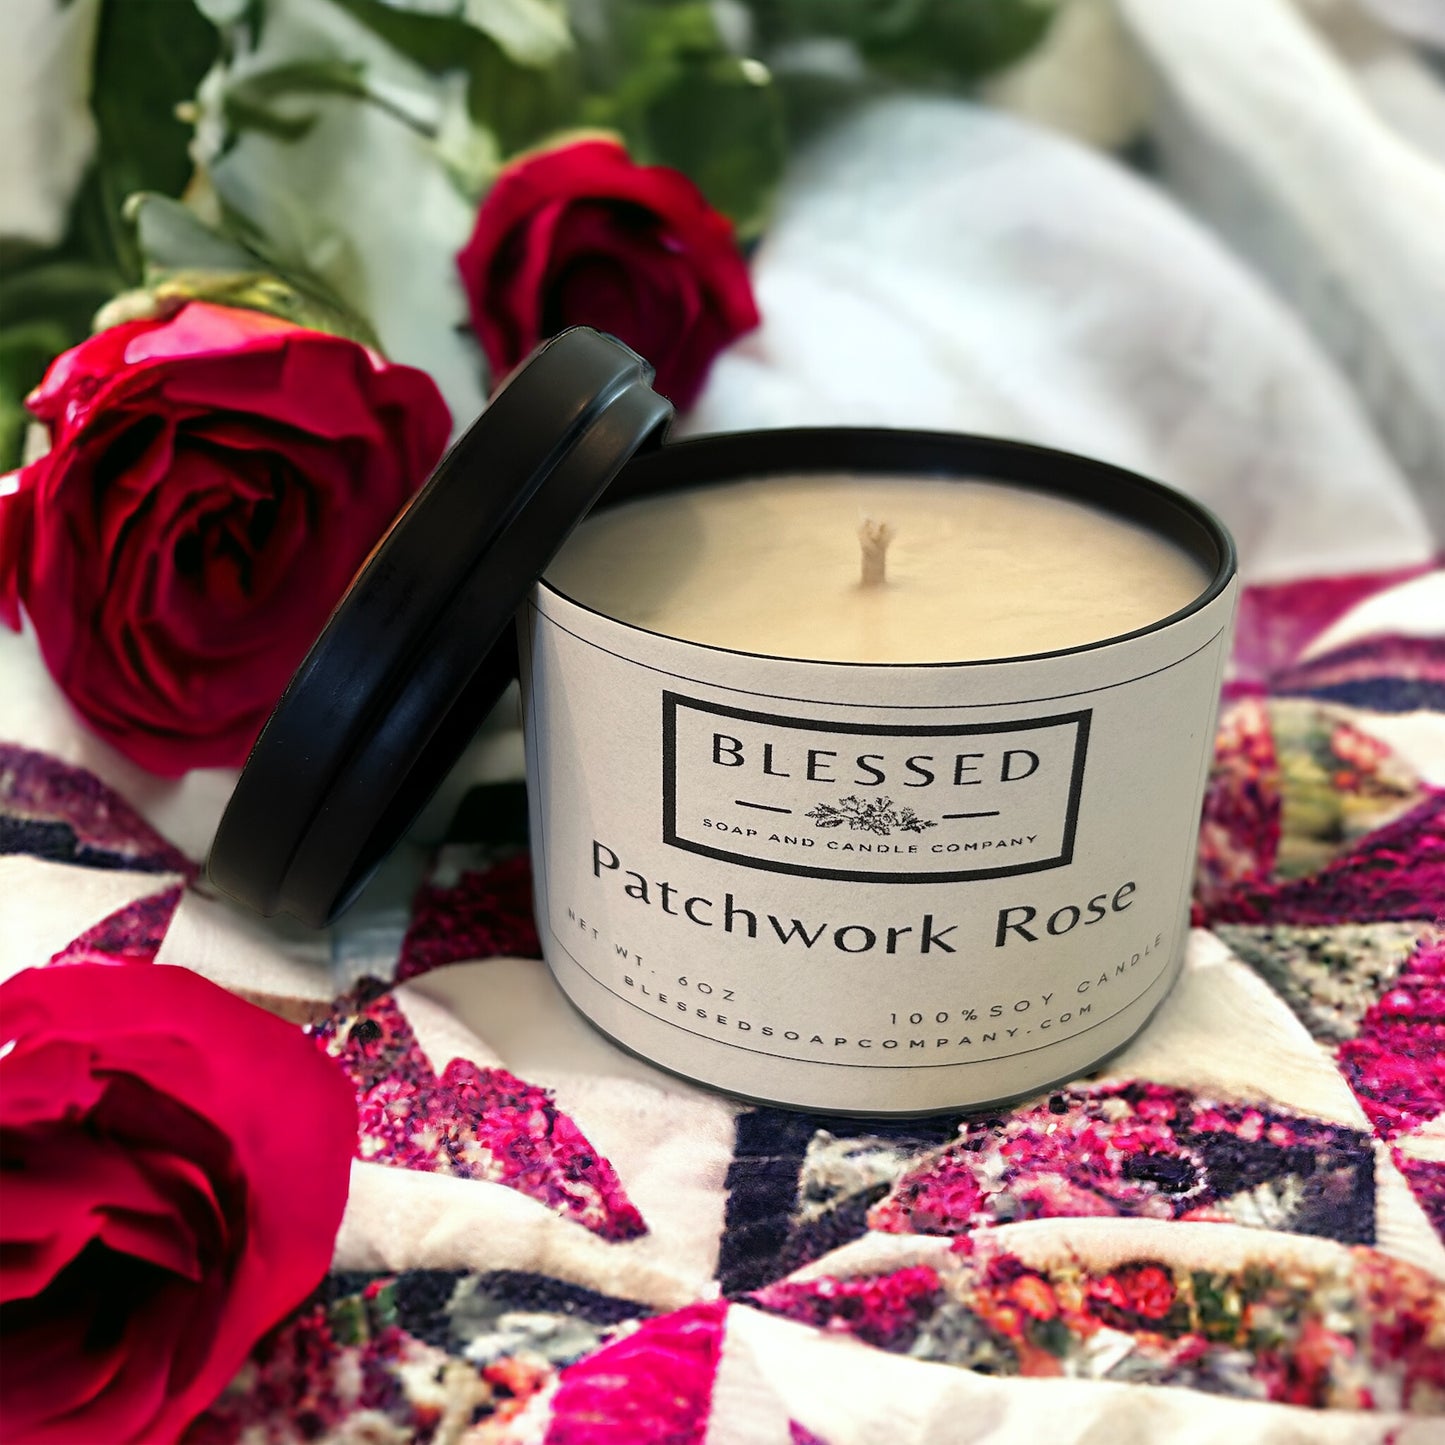 Patchwork Rose Candle